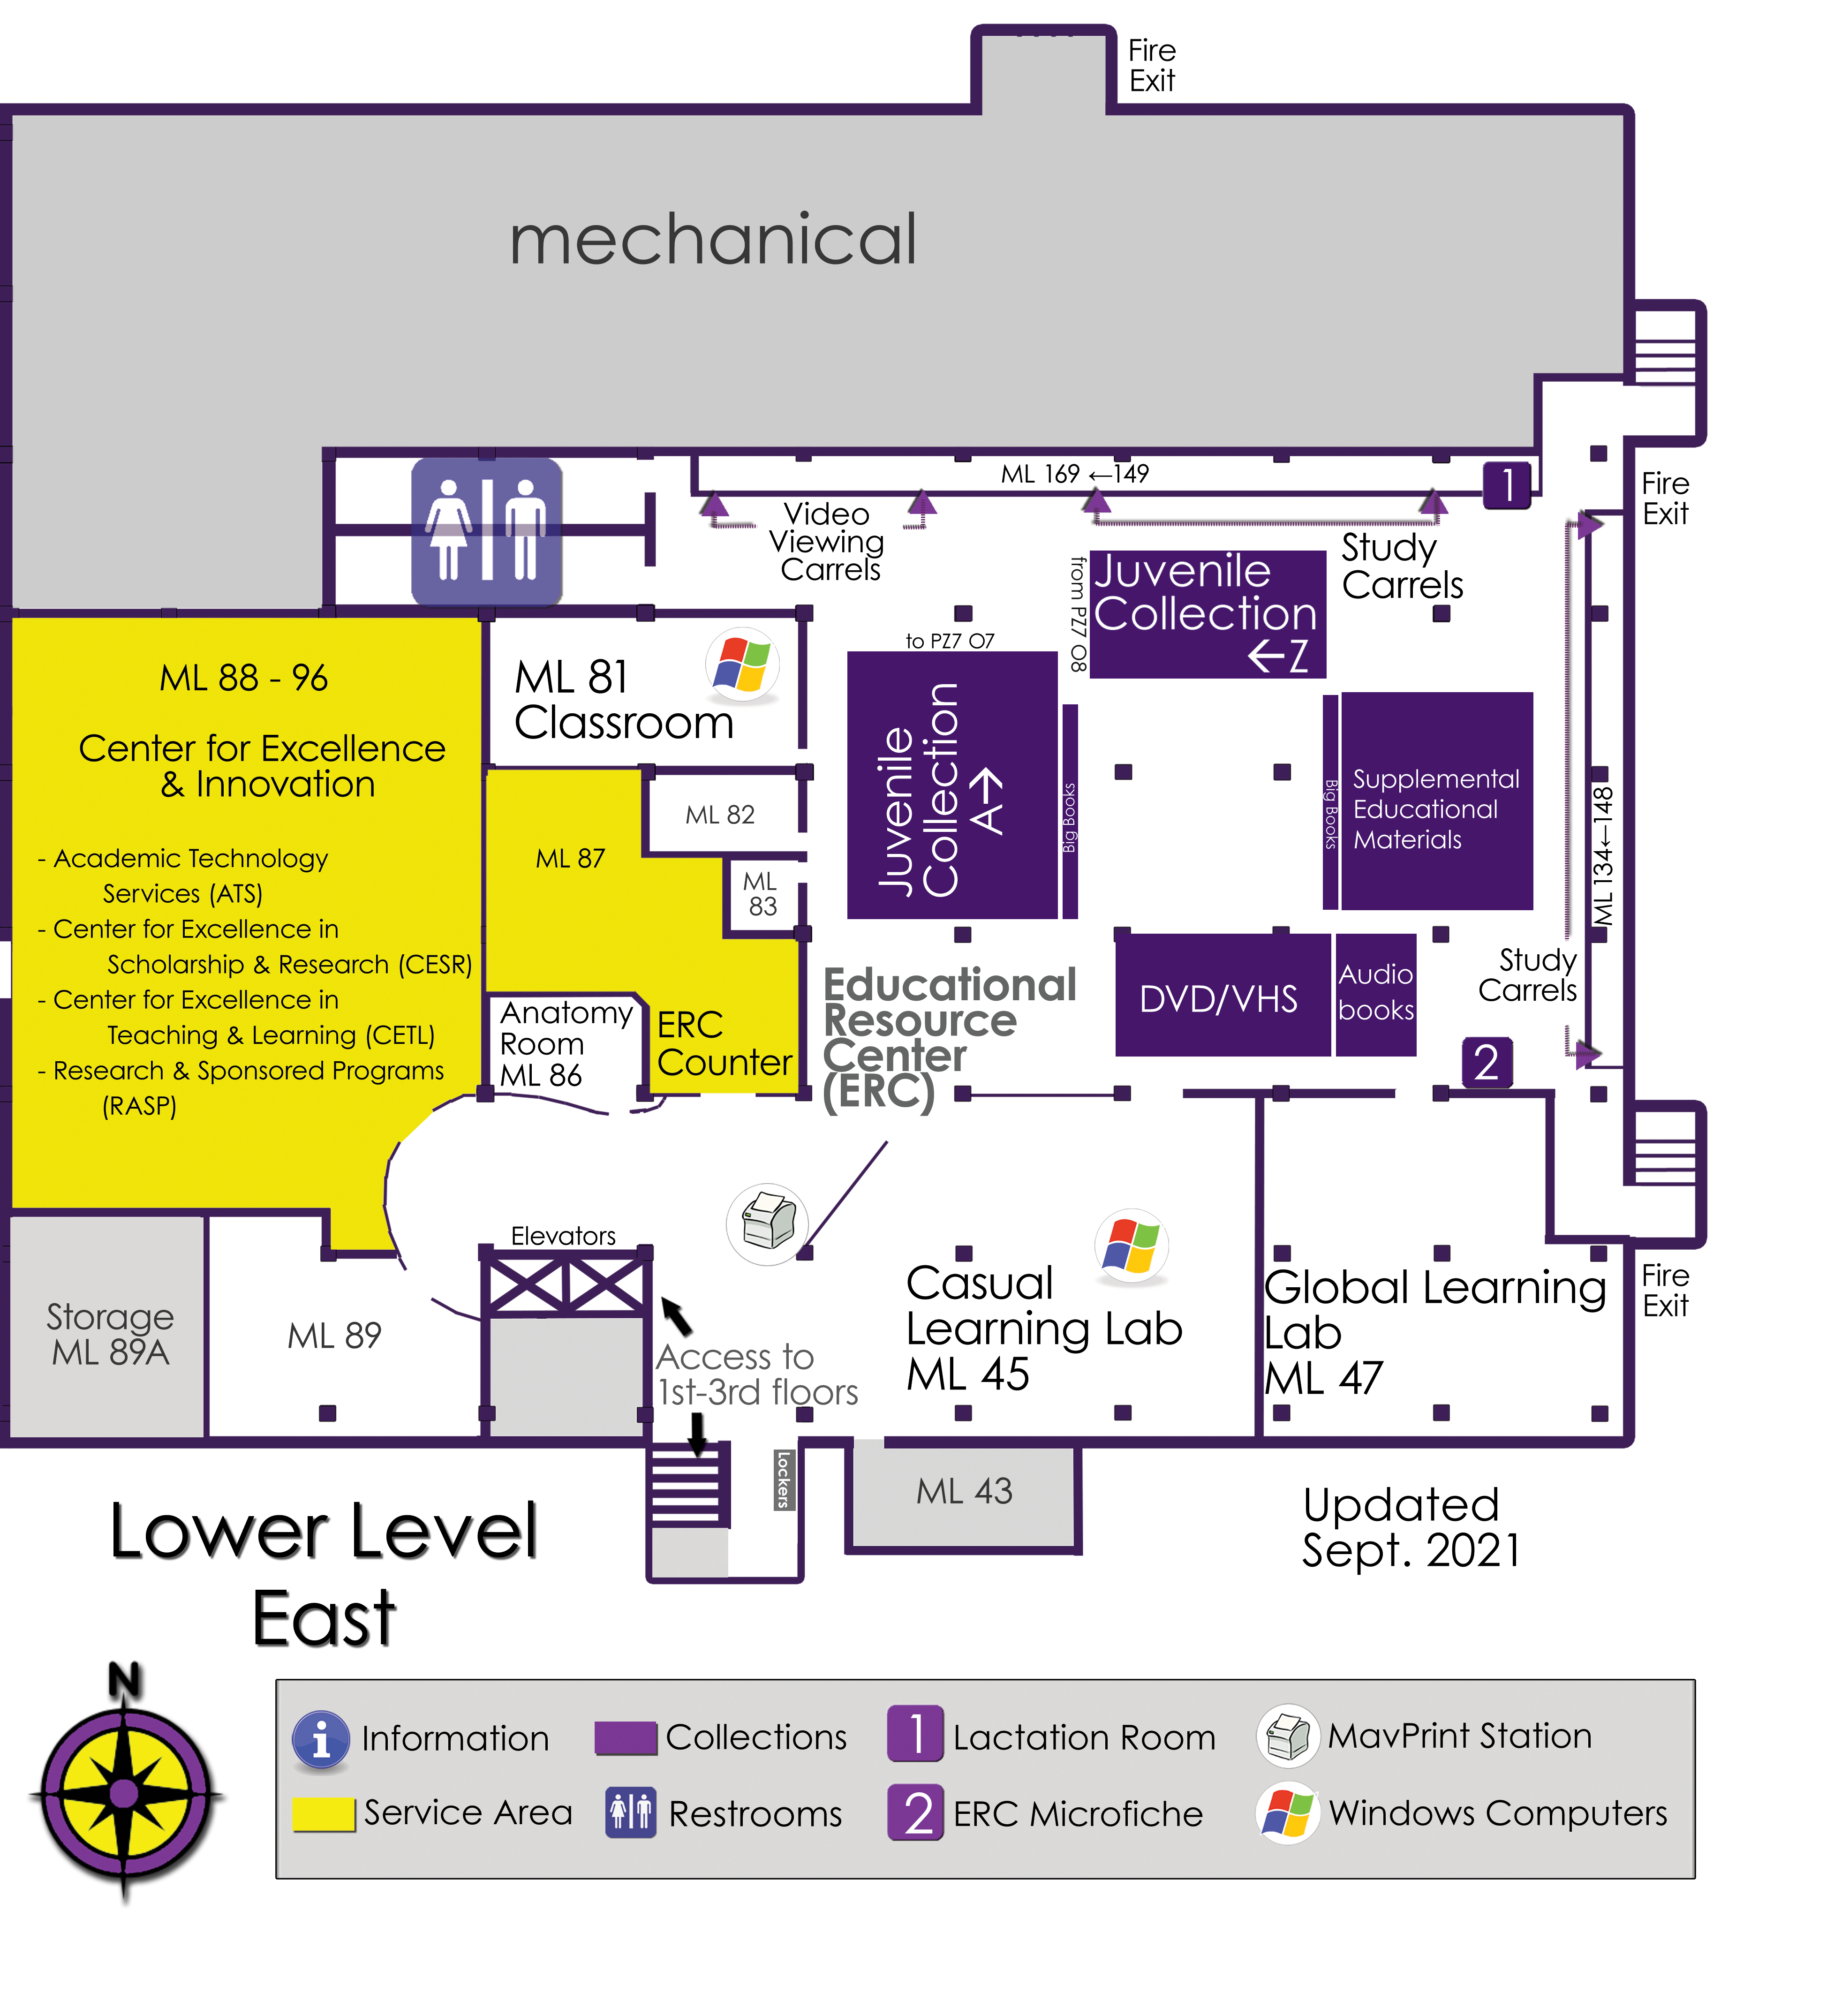 Lower Level east side map of Memorial Library